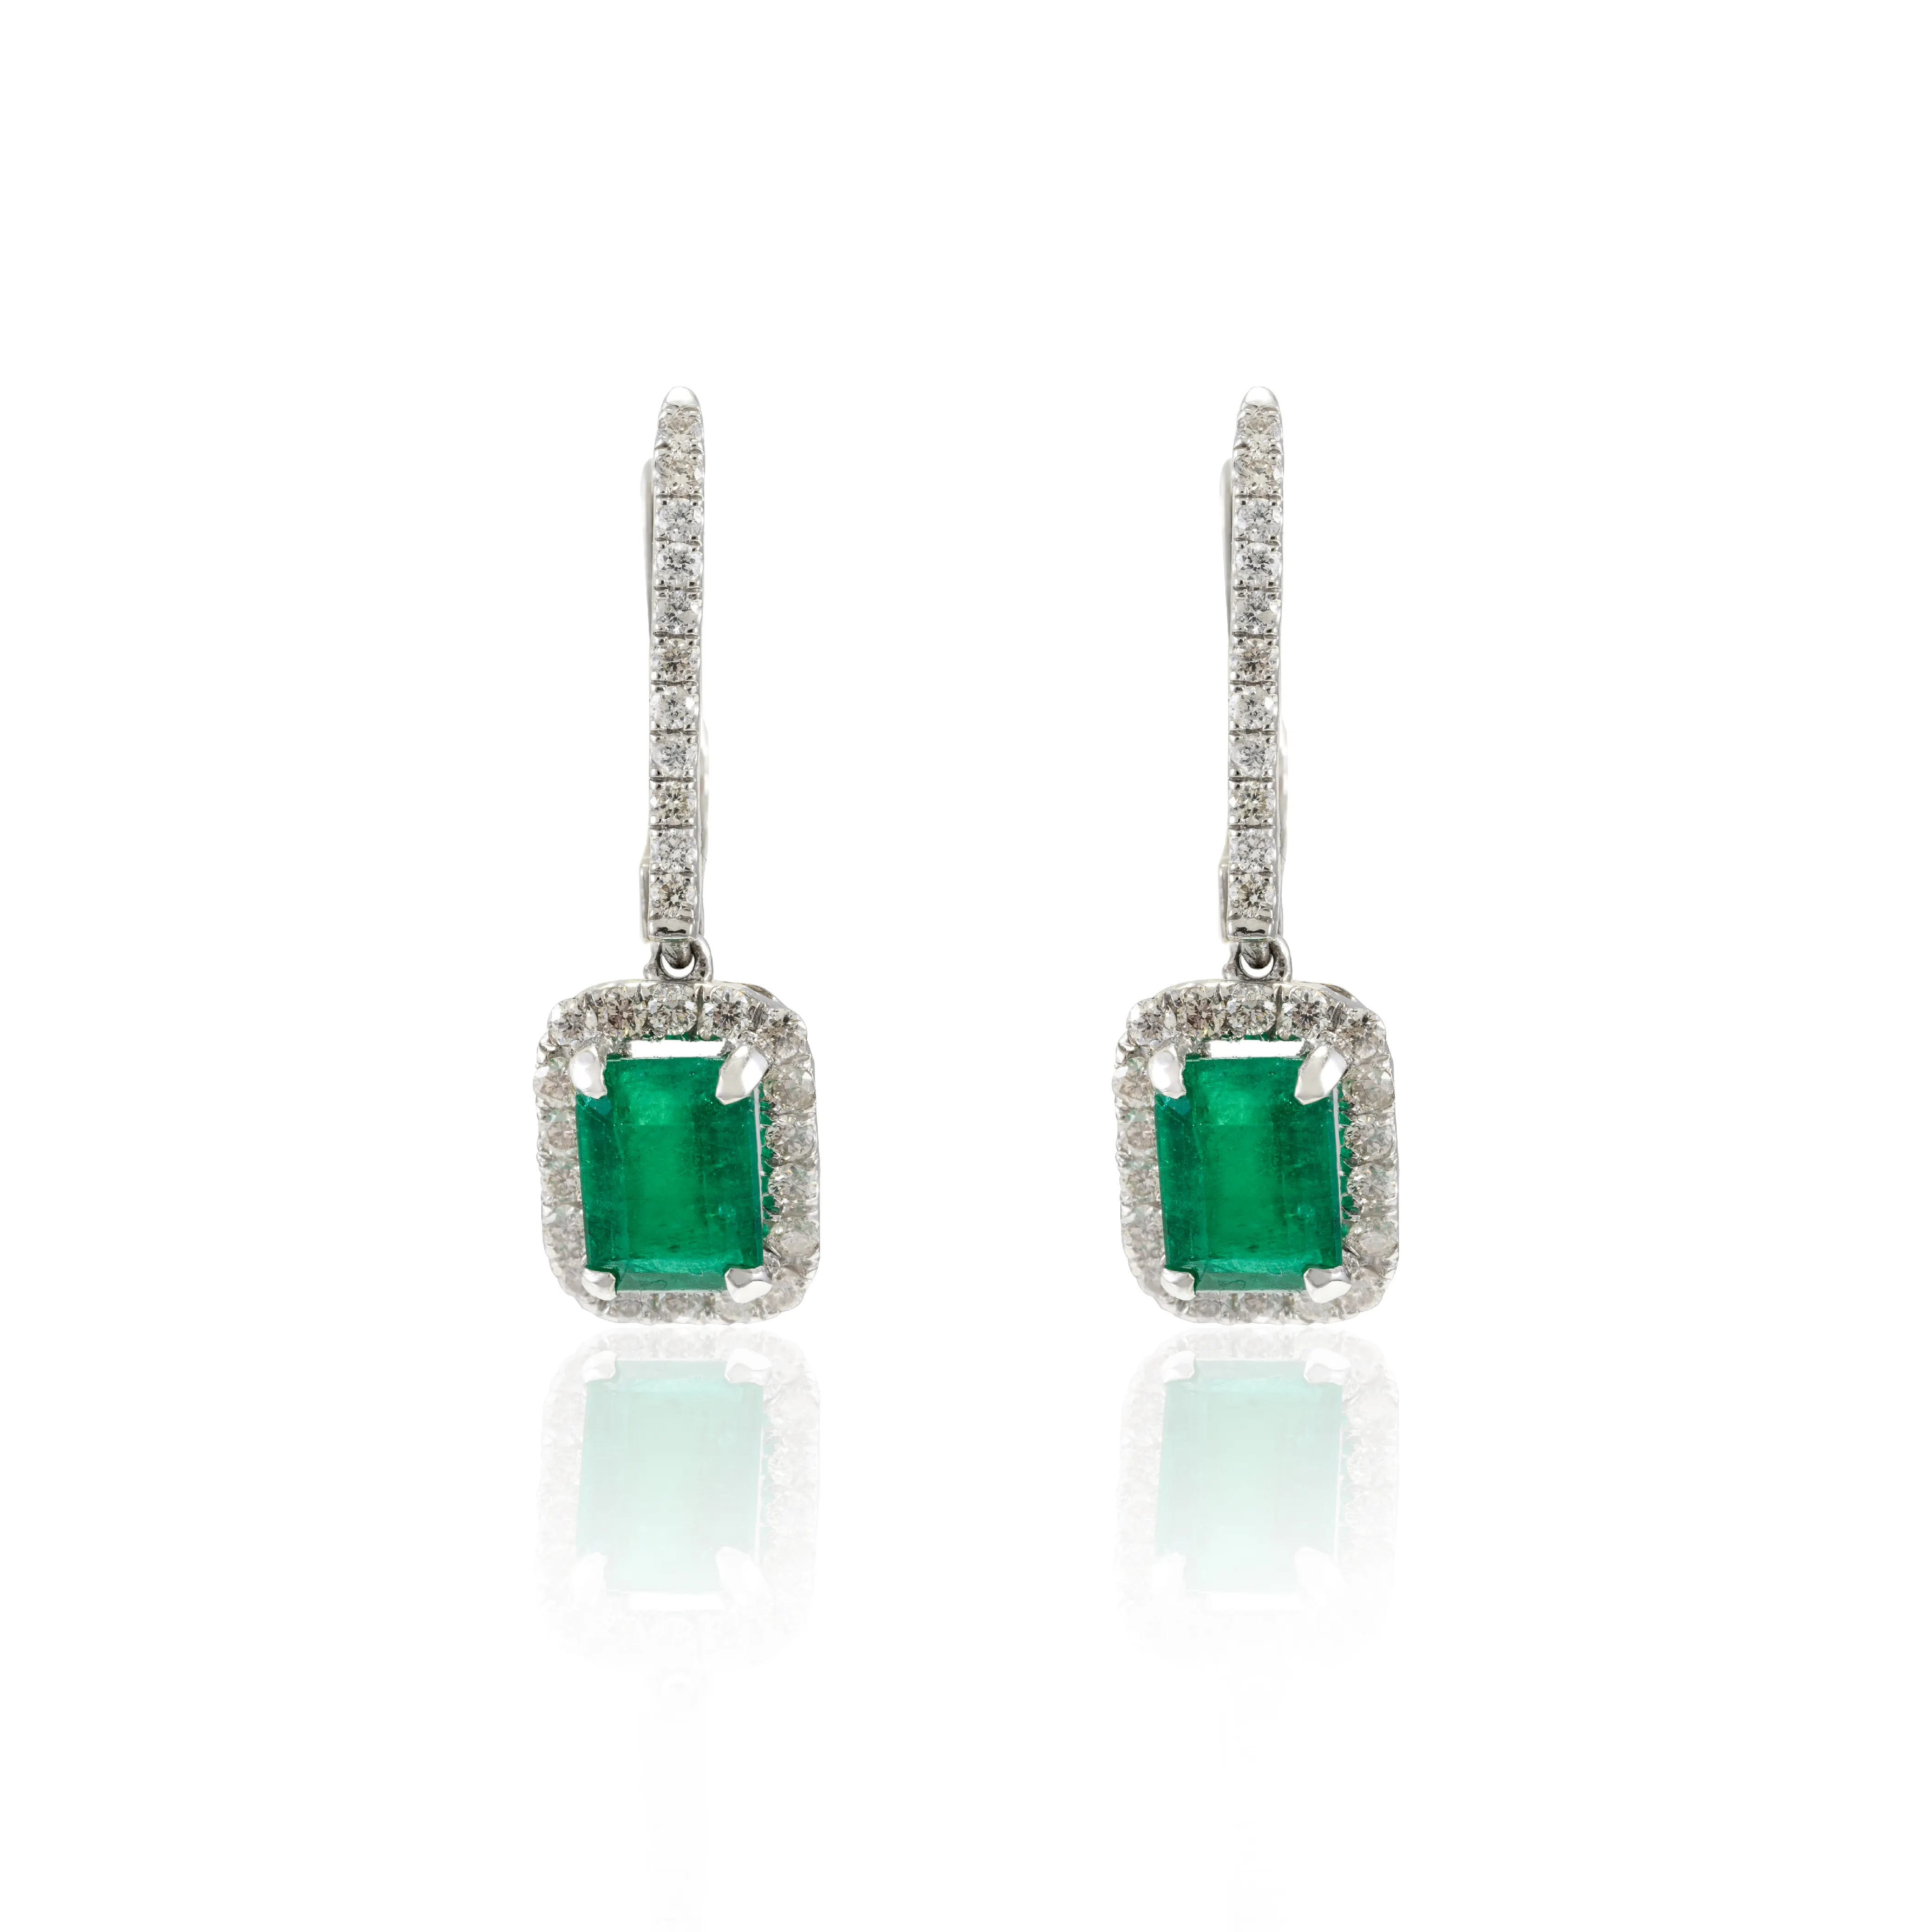 Unique Trendy Handmade 100% Authentic Natural Emerald & Diamond Drop Dangle Earrings 18k Solid White Gold May Birthstone Jewelry